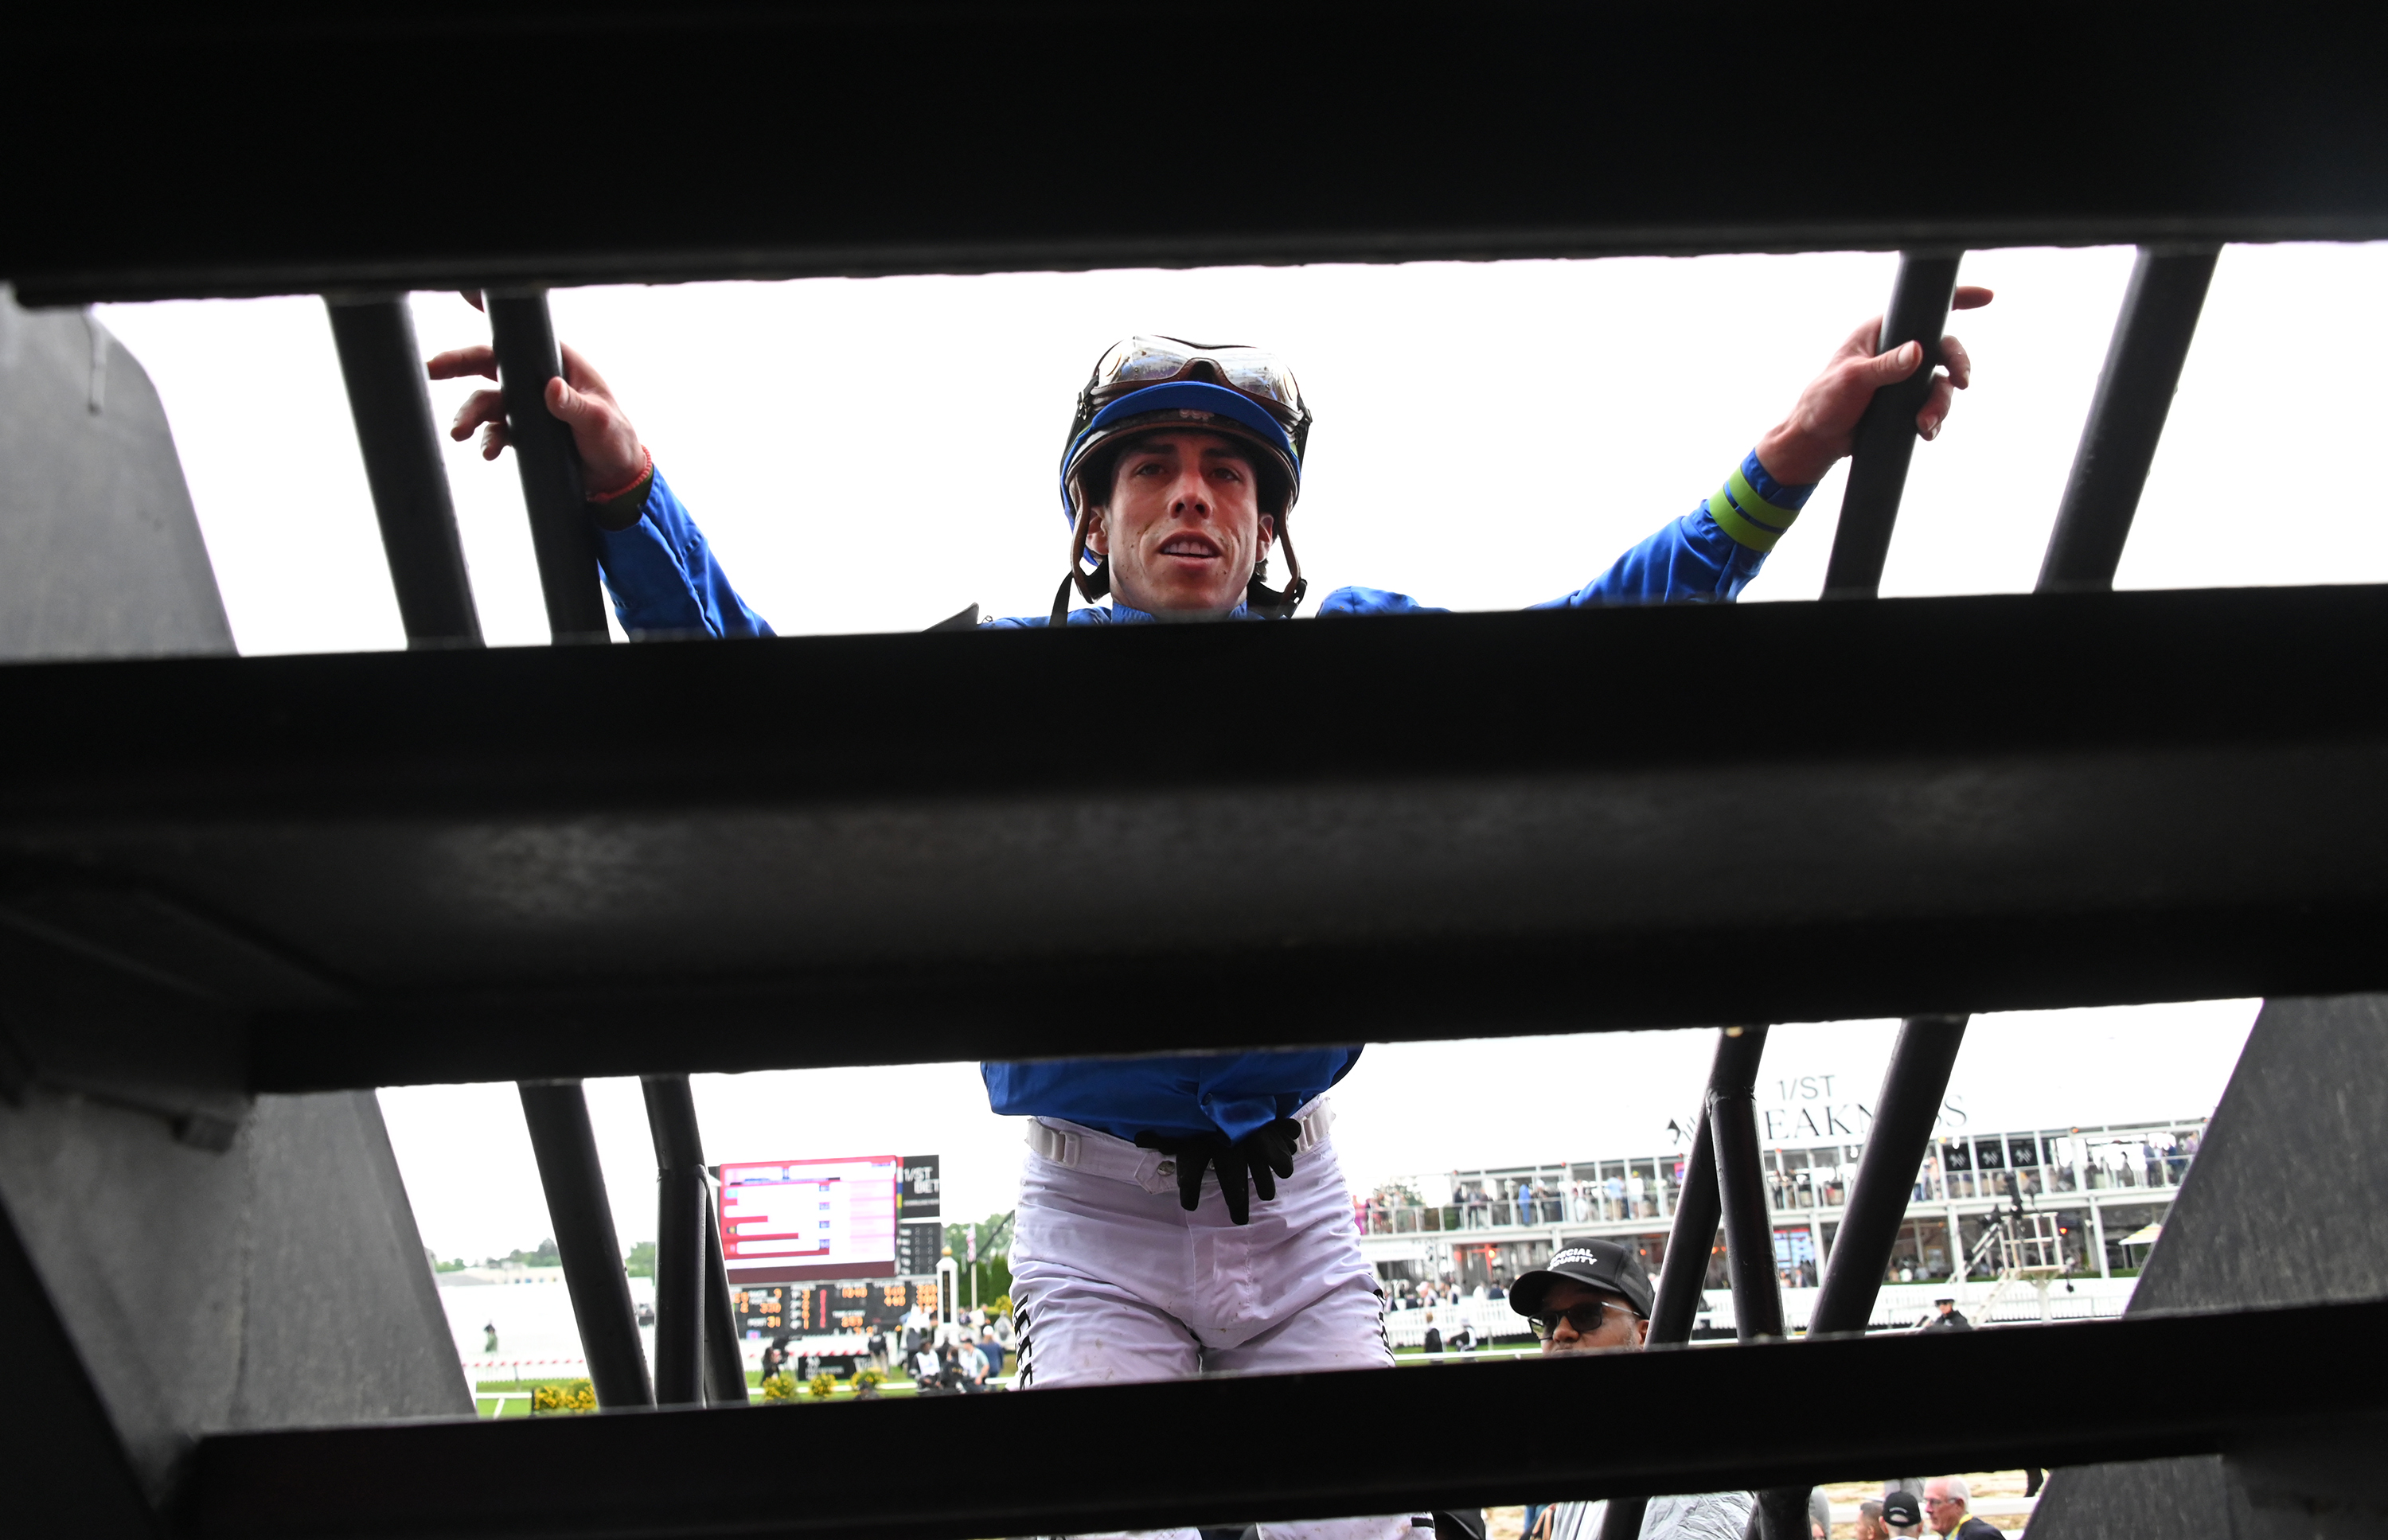 Jockey Irad Ortiz, Jr. makes his way to the jockey's room after the 8th race of the day at Pimlico. The 2024 Preakness at Pimlico Race Course Saturday. (Lloyd Fox/Staff)